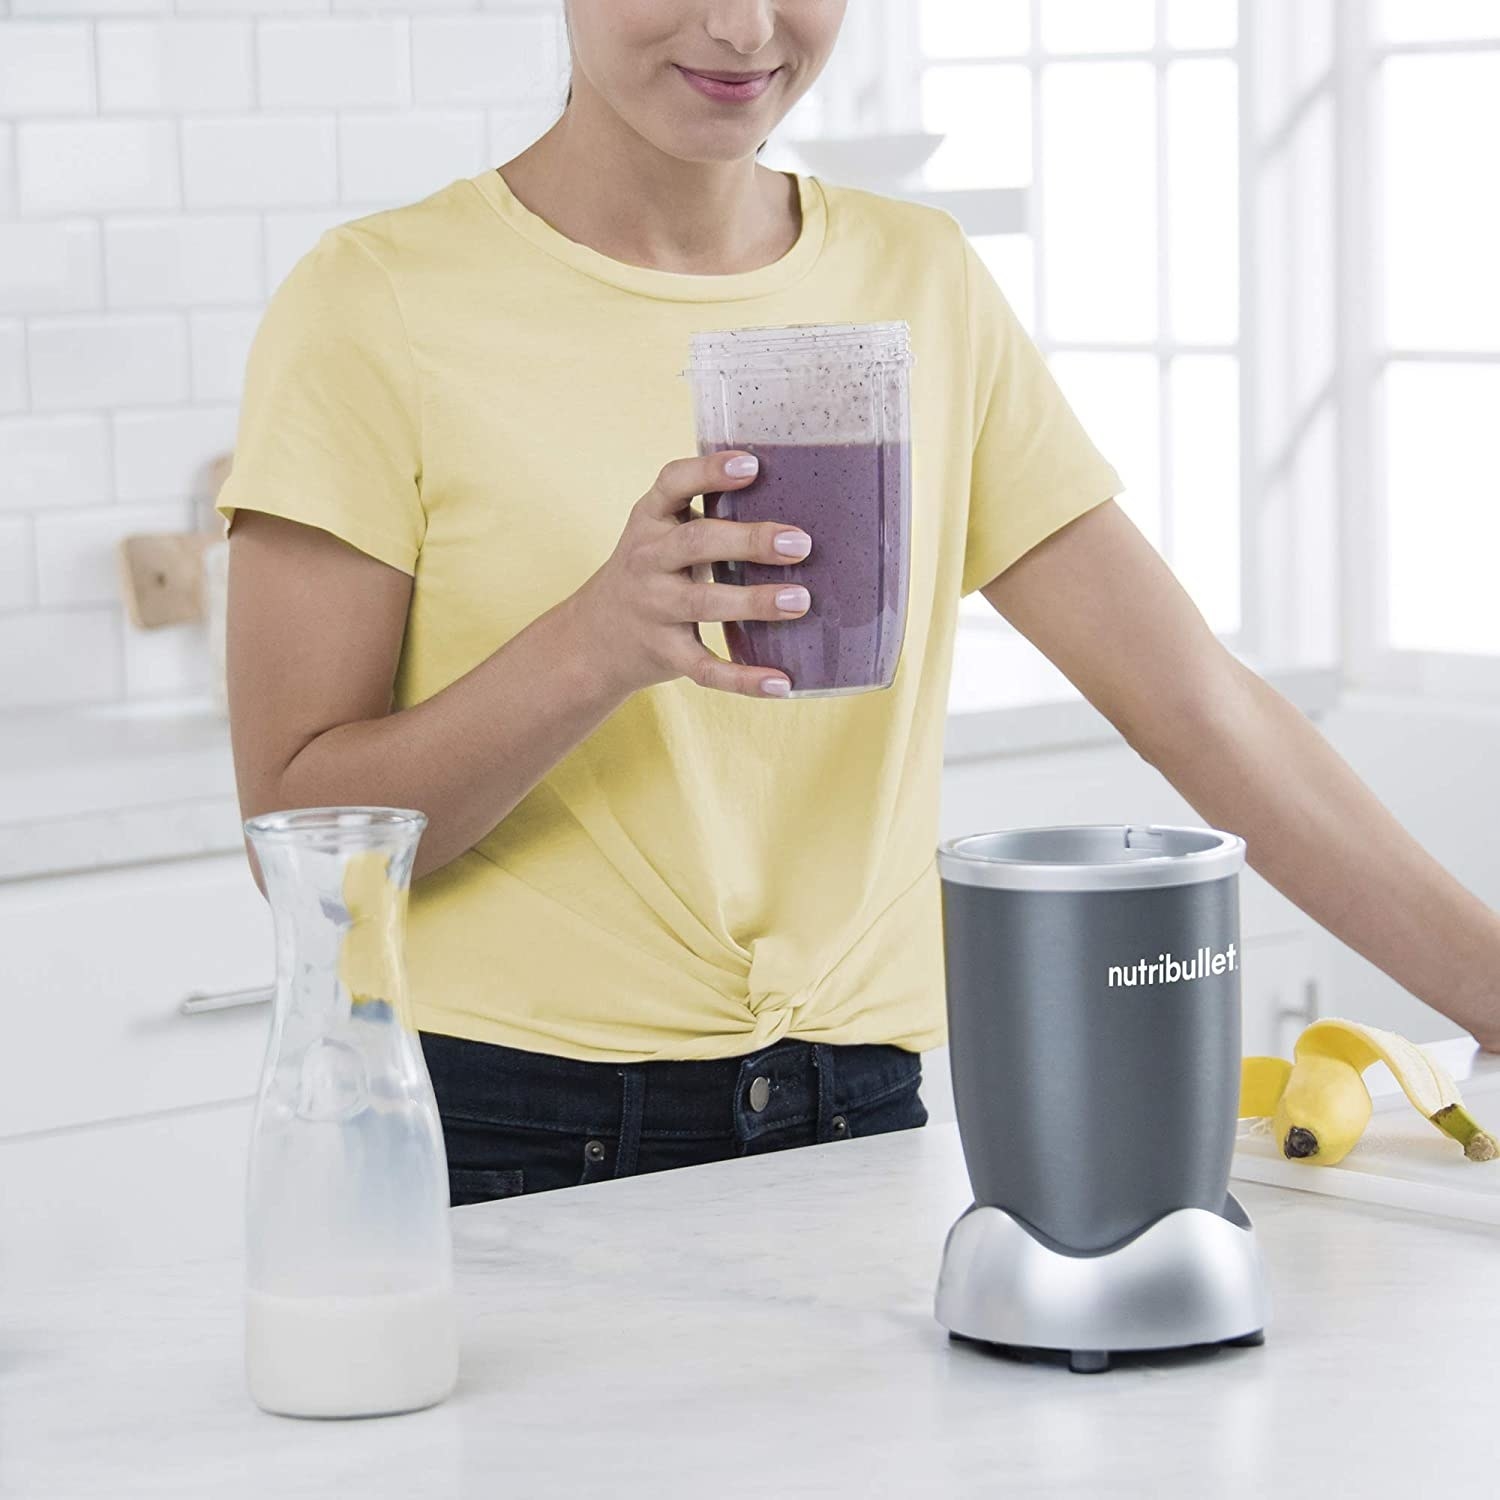 Model drinking a smoothie out of the NutriBullet cup 